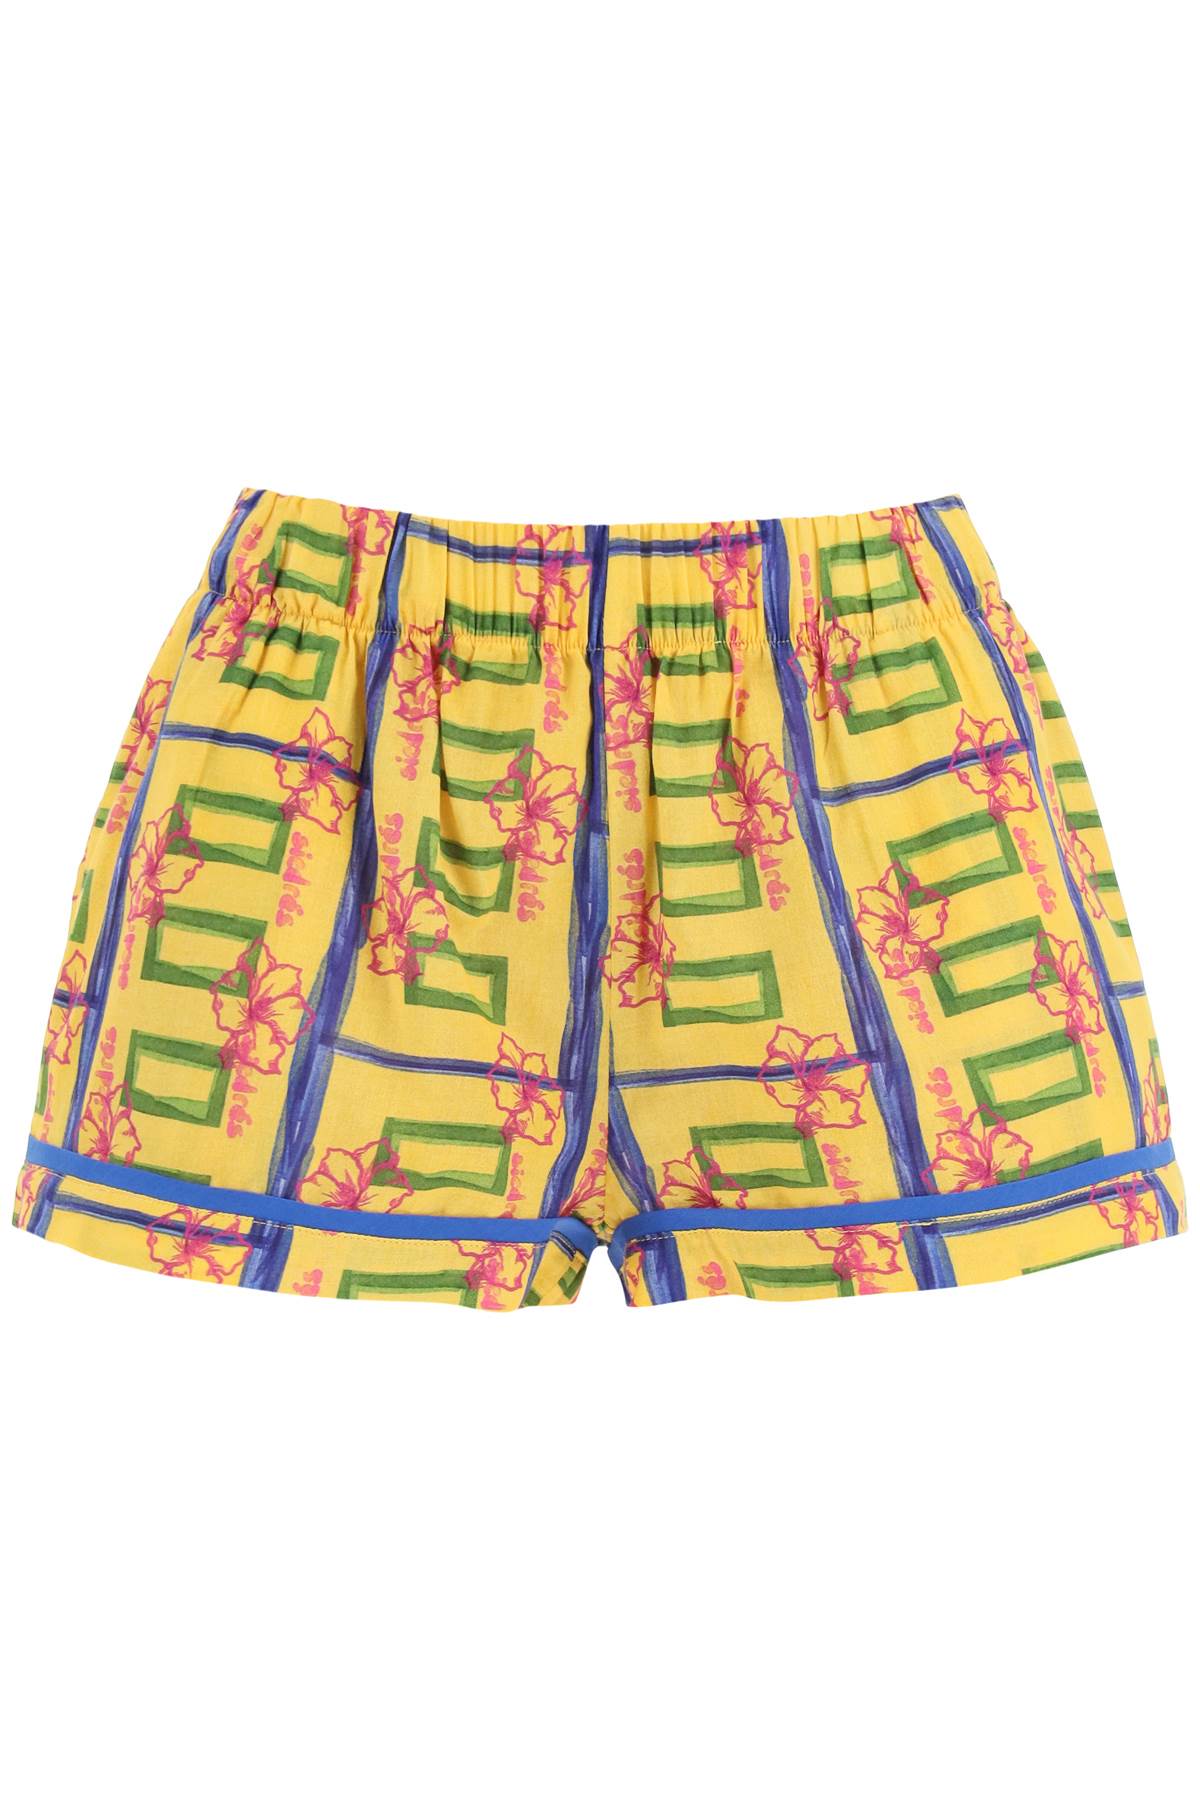 All-over Printed Cotton zyon Shorts